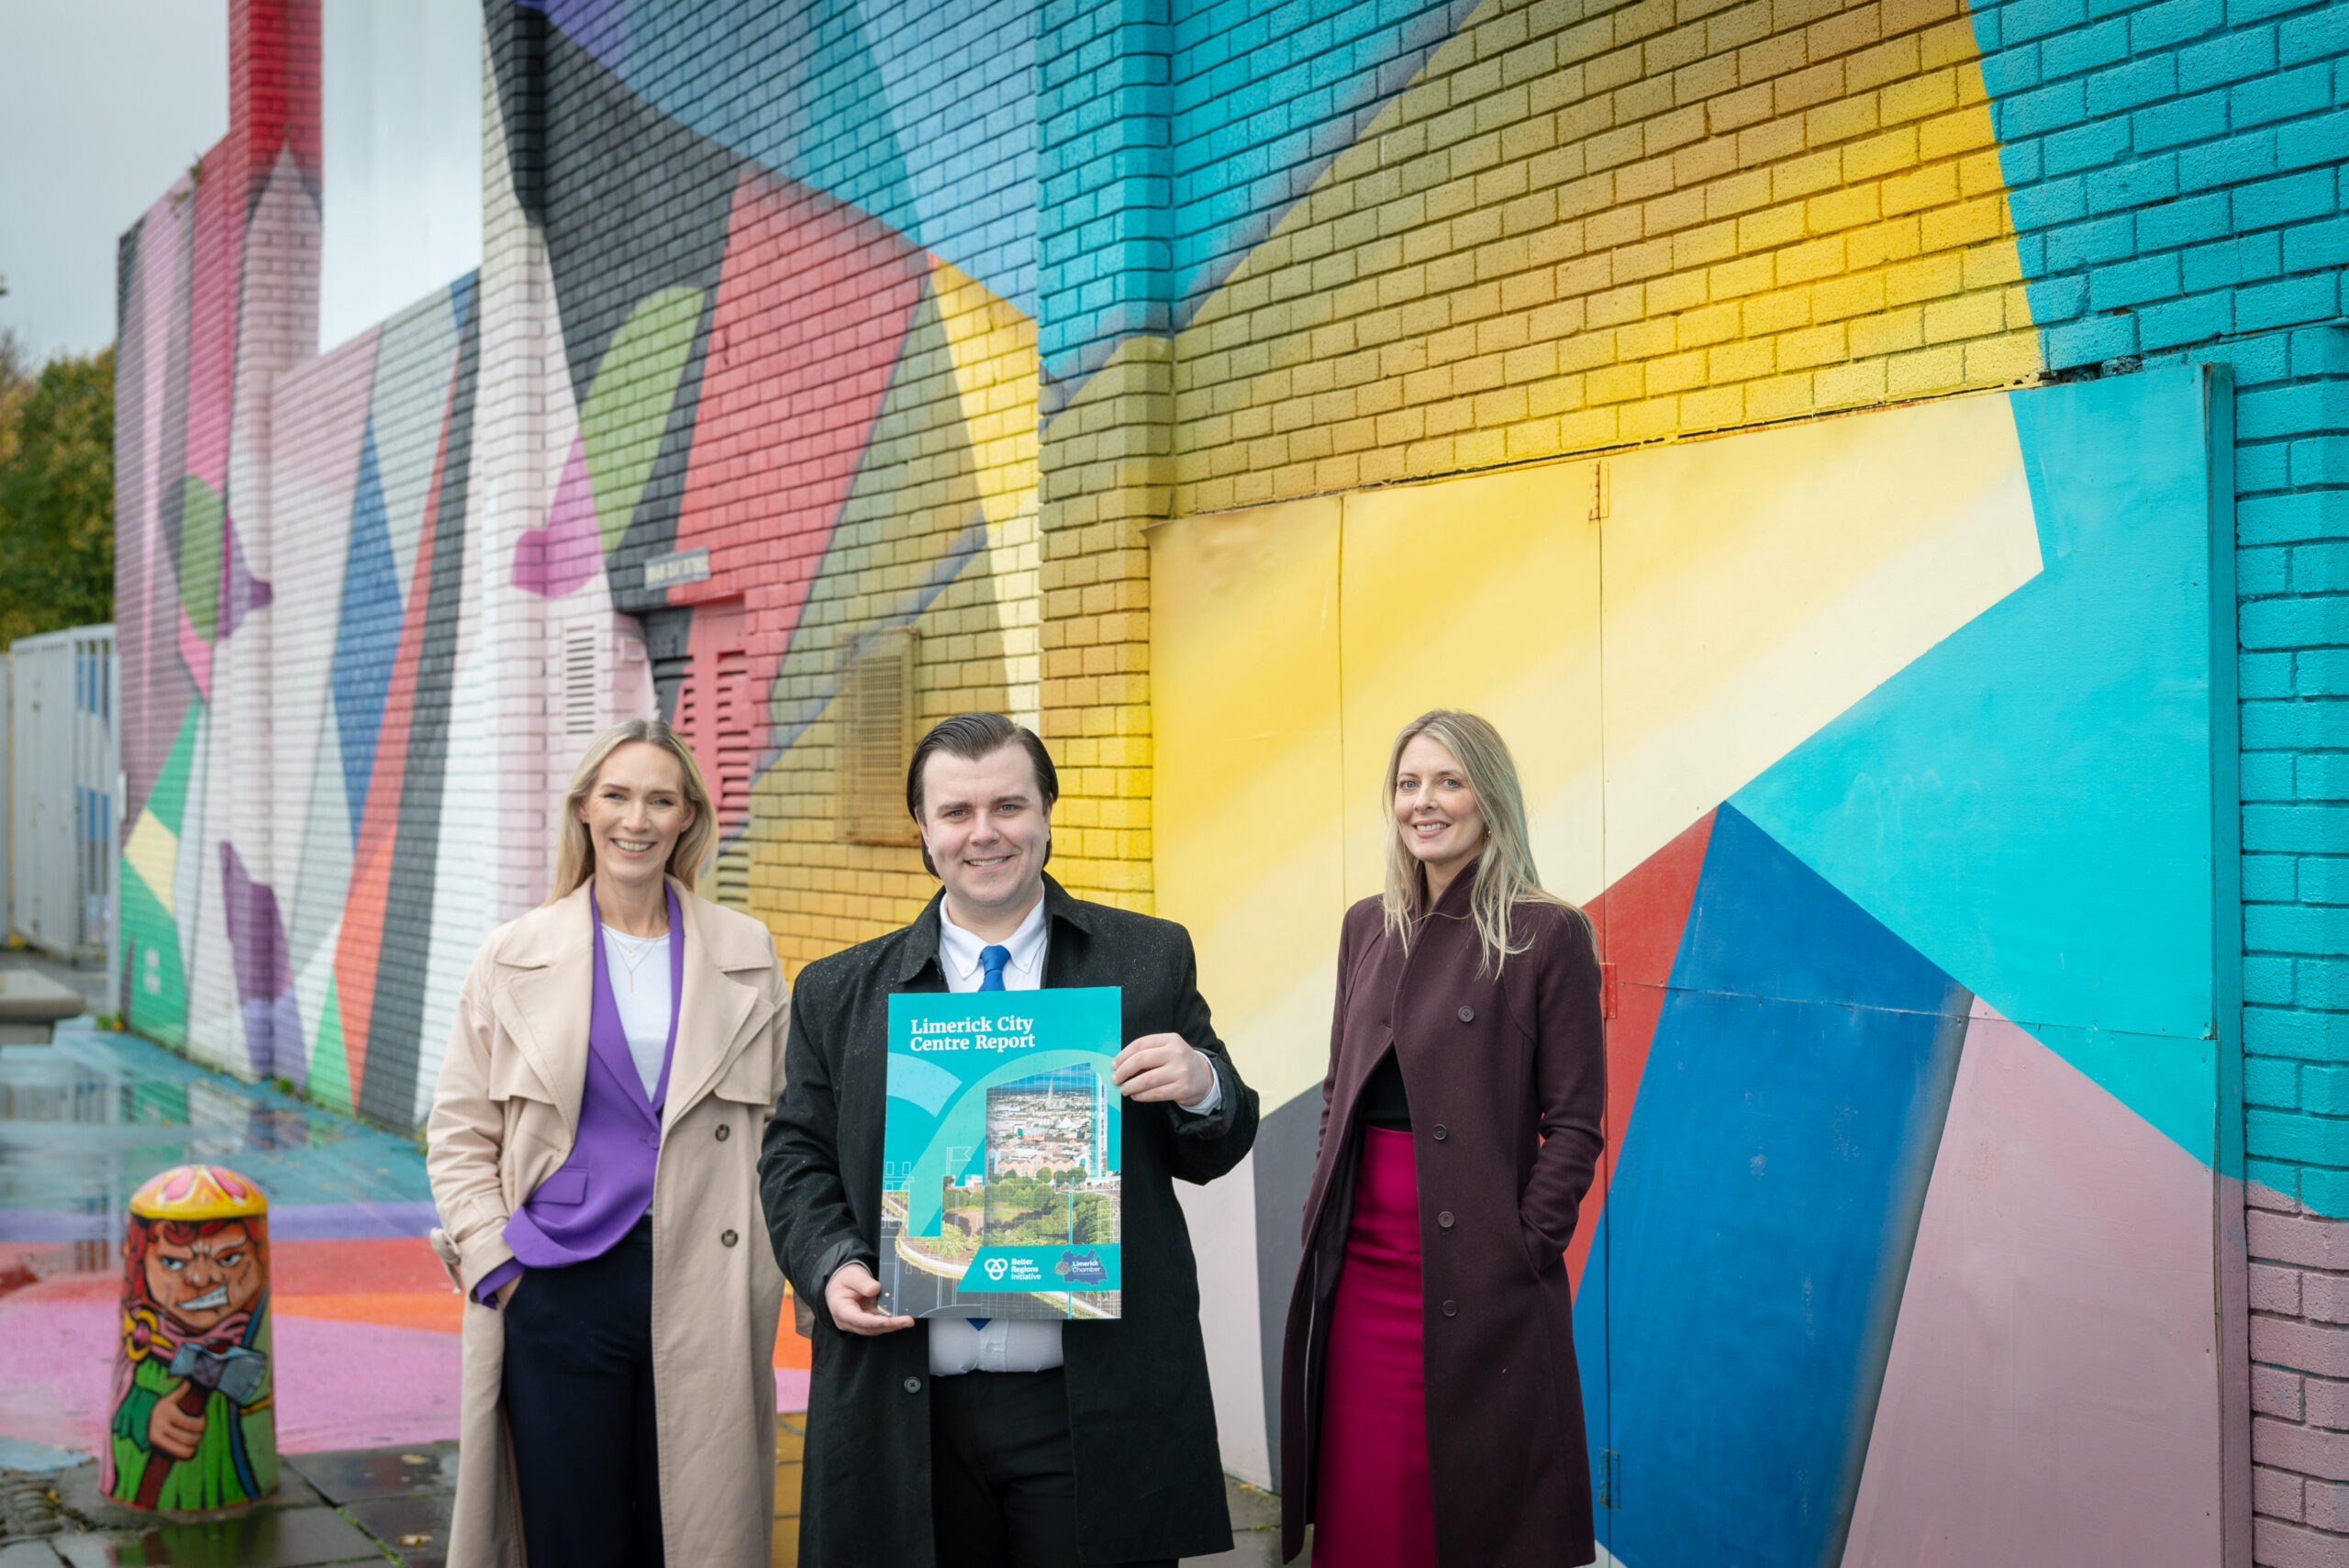 Limerick Chamber Podcast Unveils Key Insights from the Limerick City Centre Report